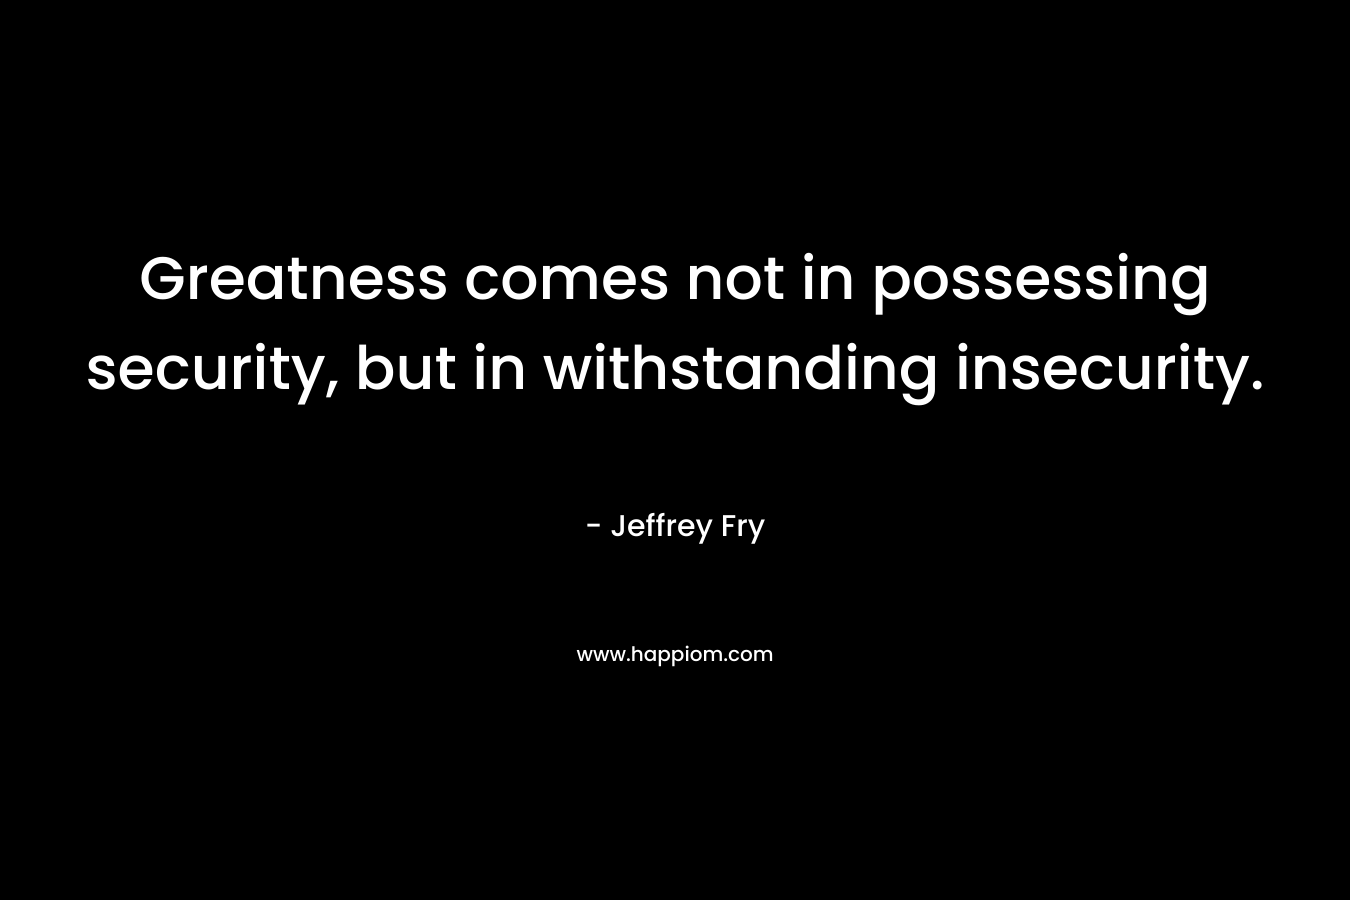 Greatness comes not in possessing security, but in withstanding insecurity. – Jeffrey Fry